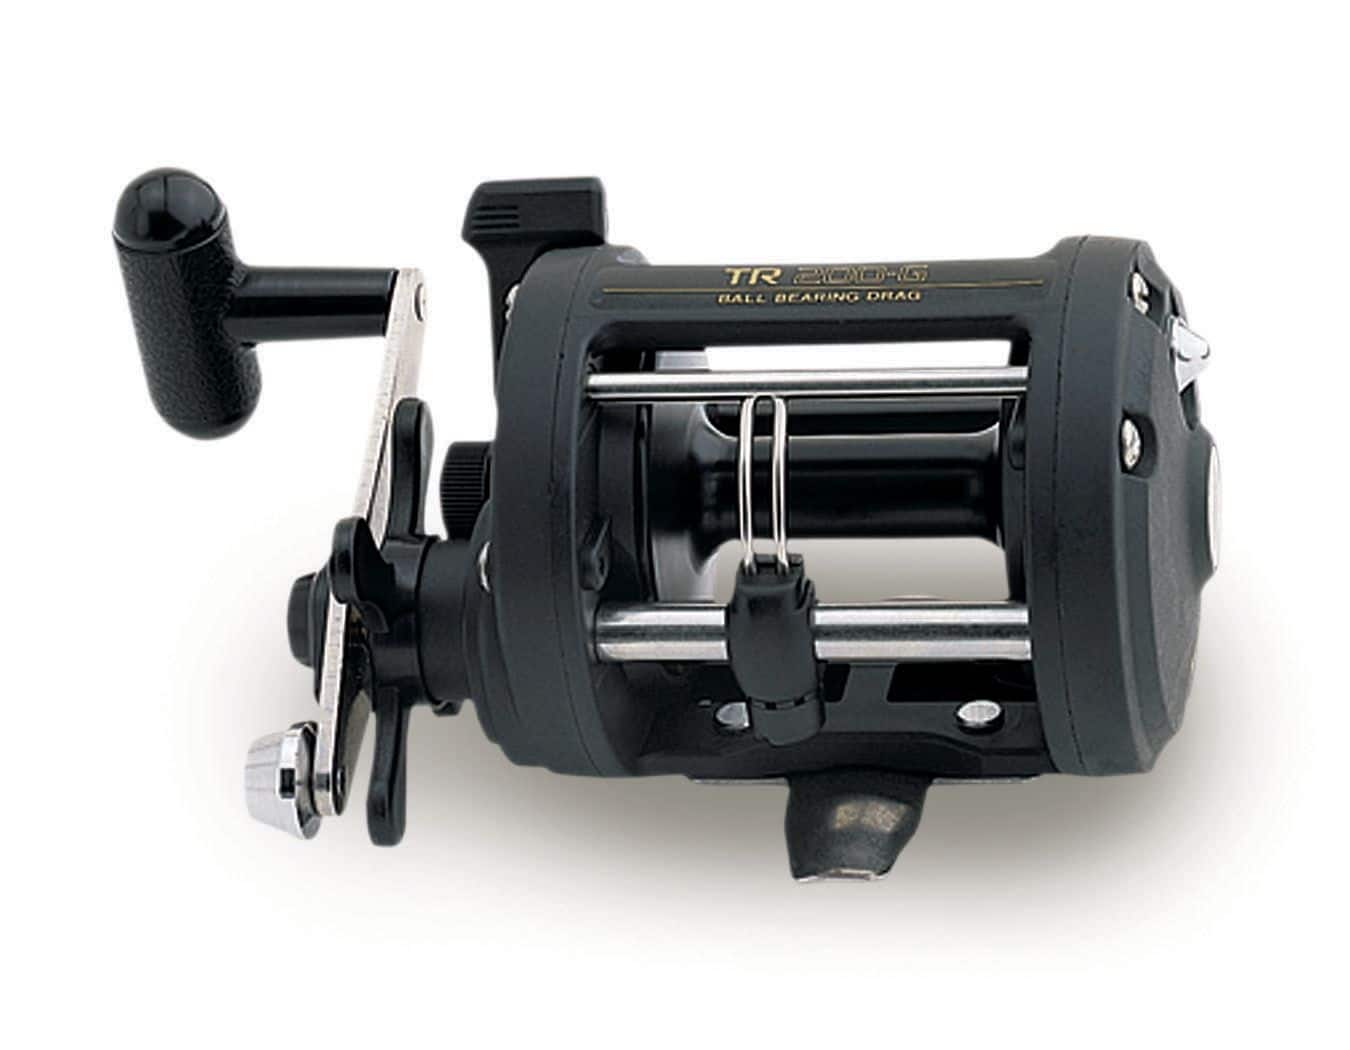 Wholesale Rear Drag Fishing Reels Products at Factory Prices from